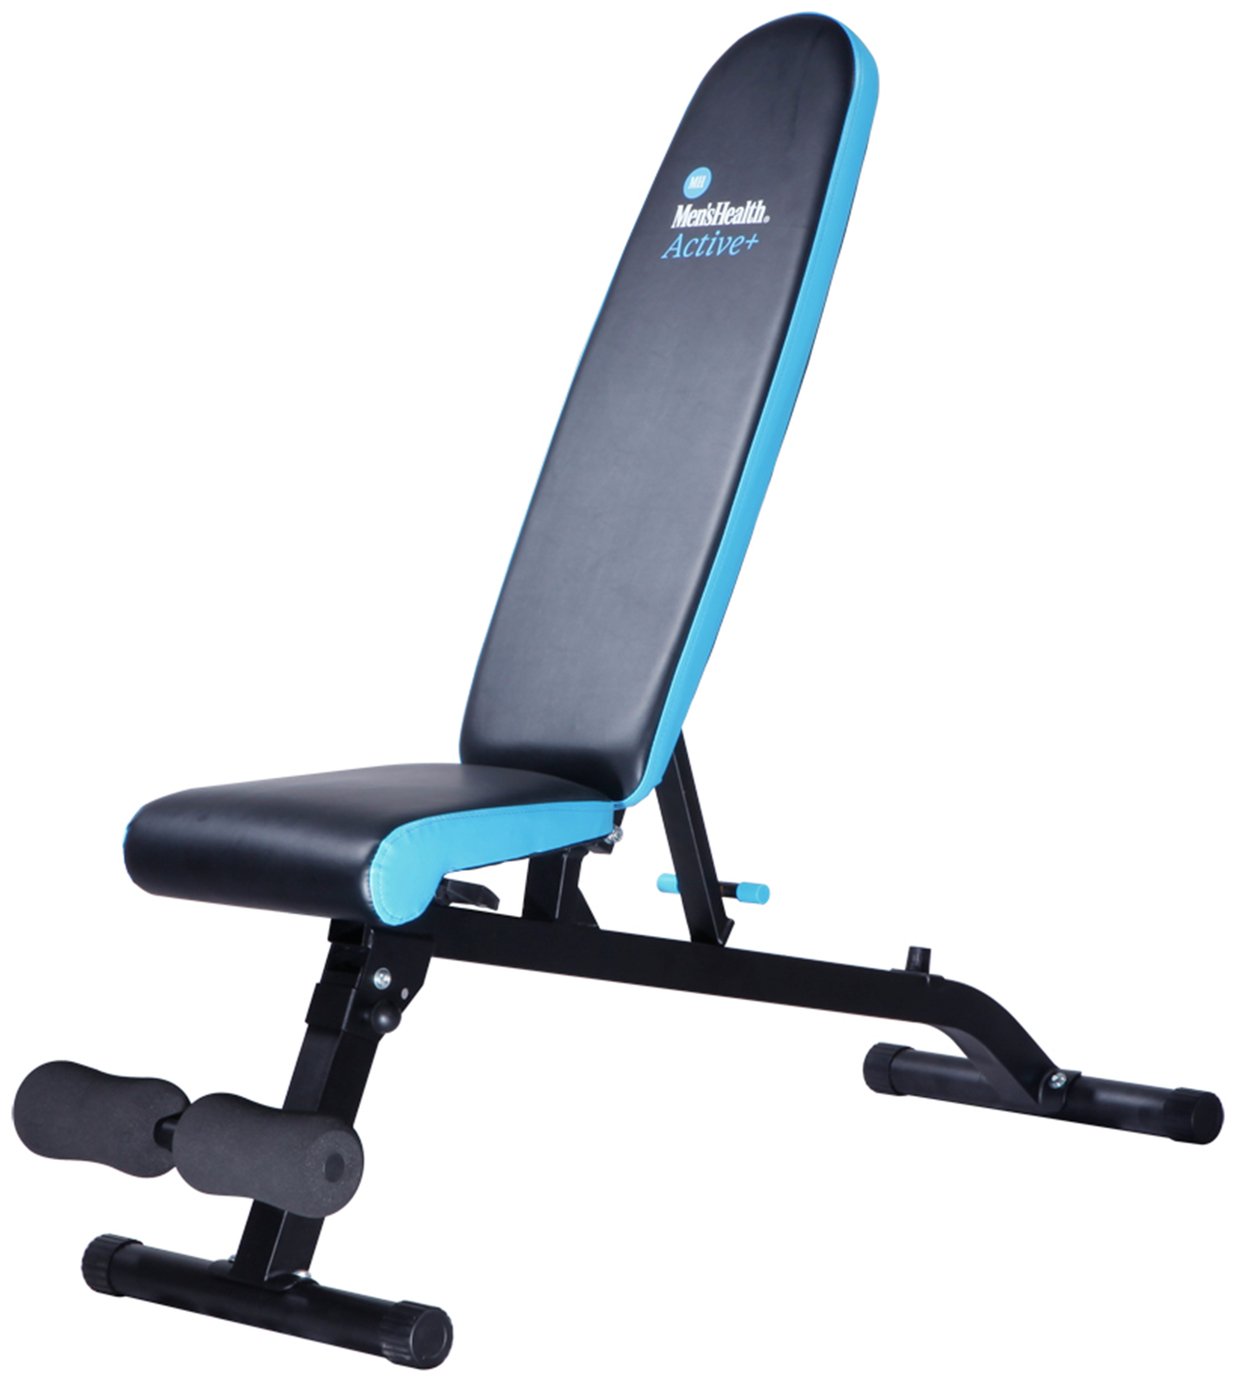 Men's Health Incline and Decline Utility Bench